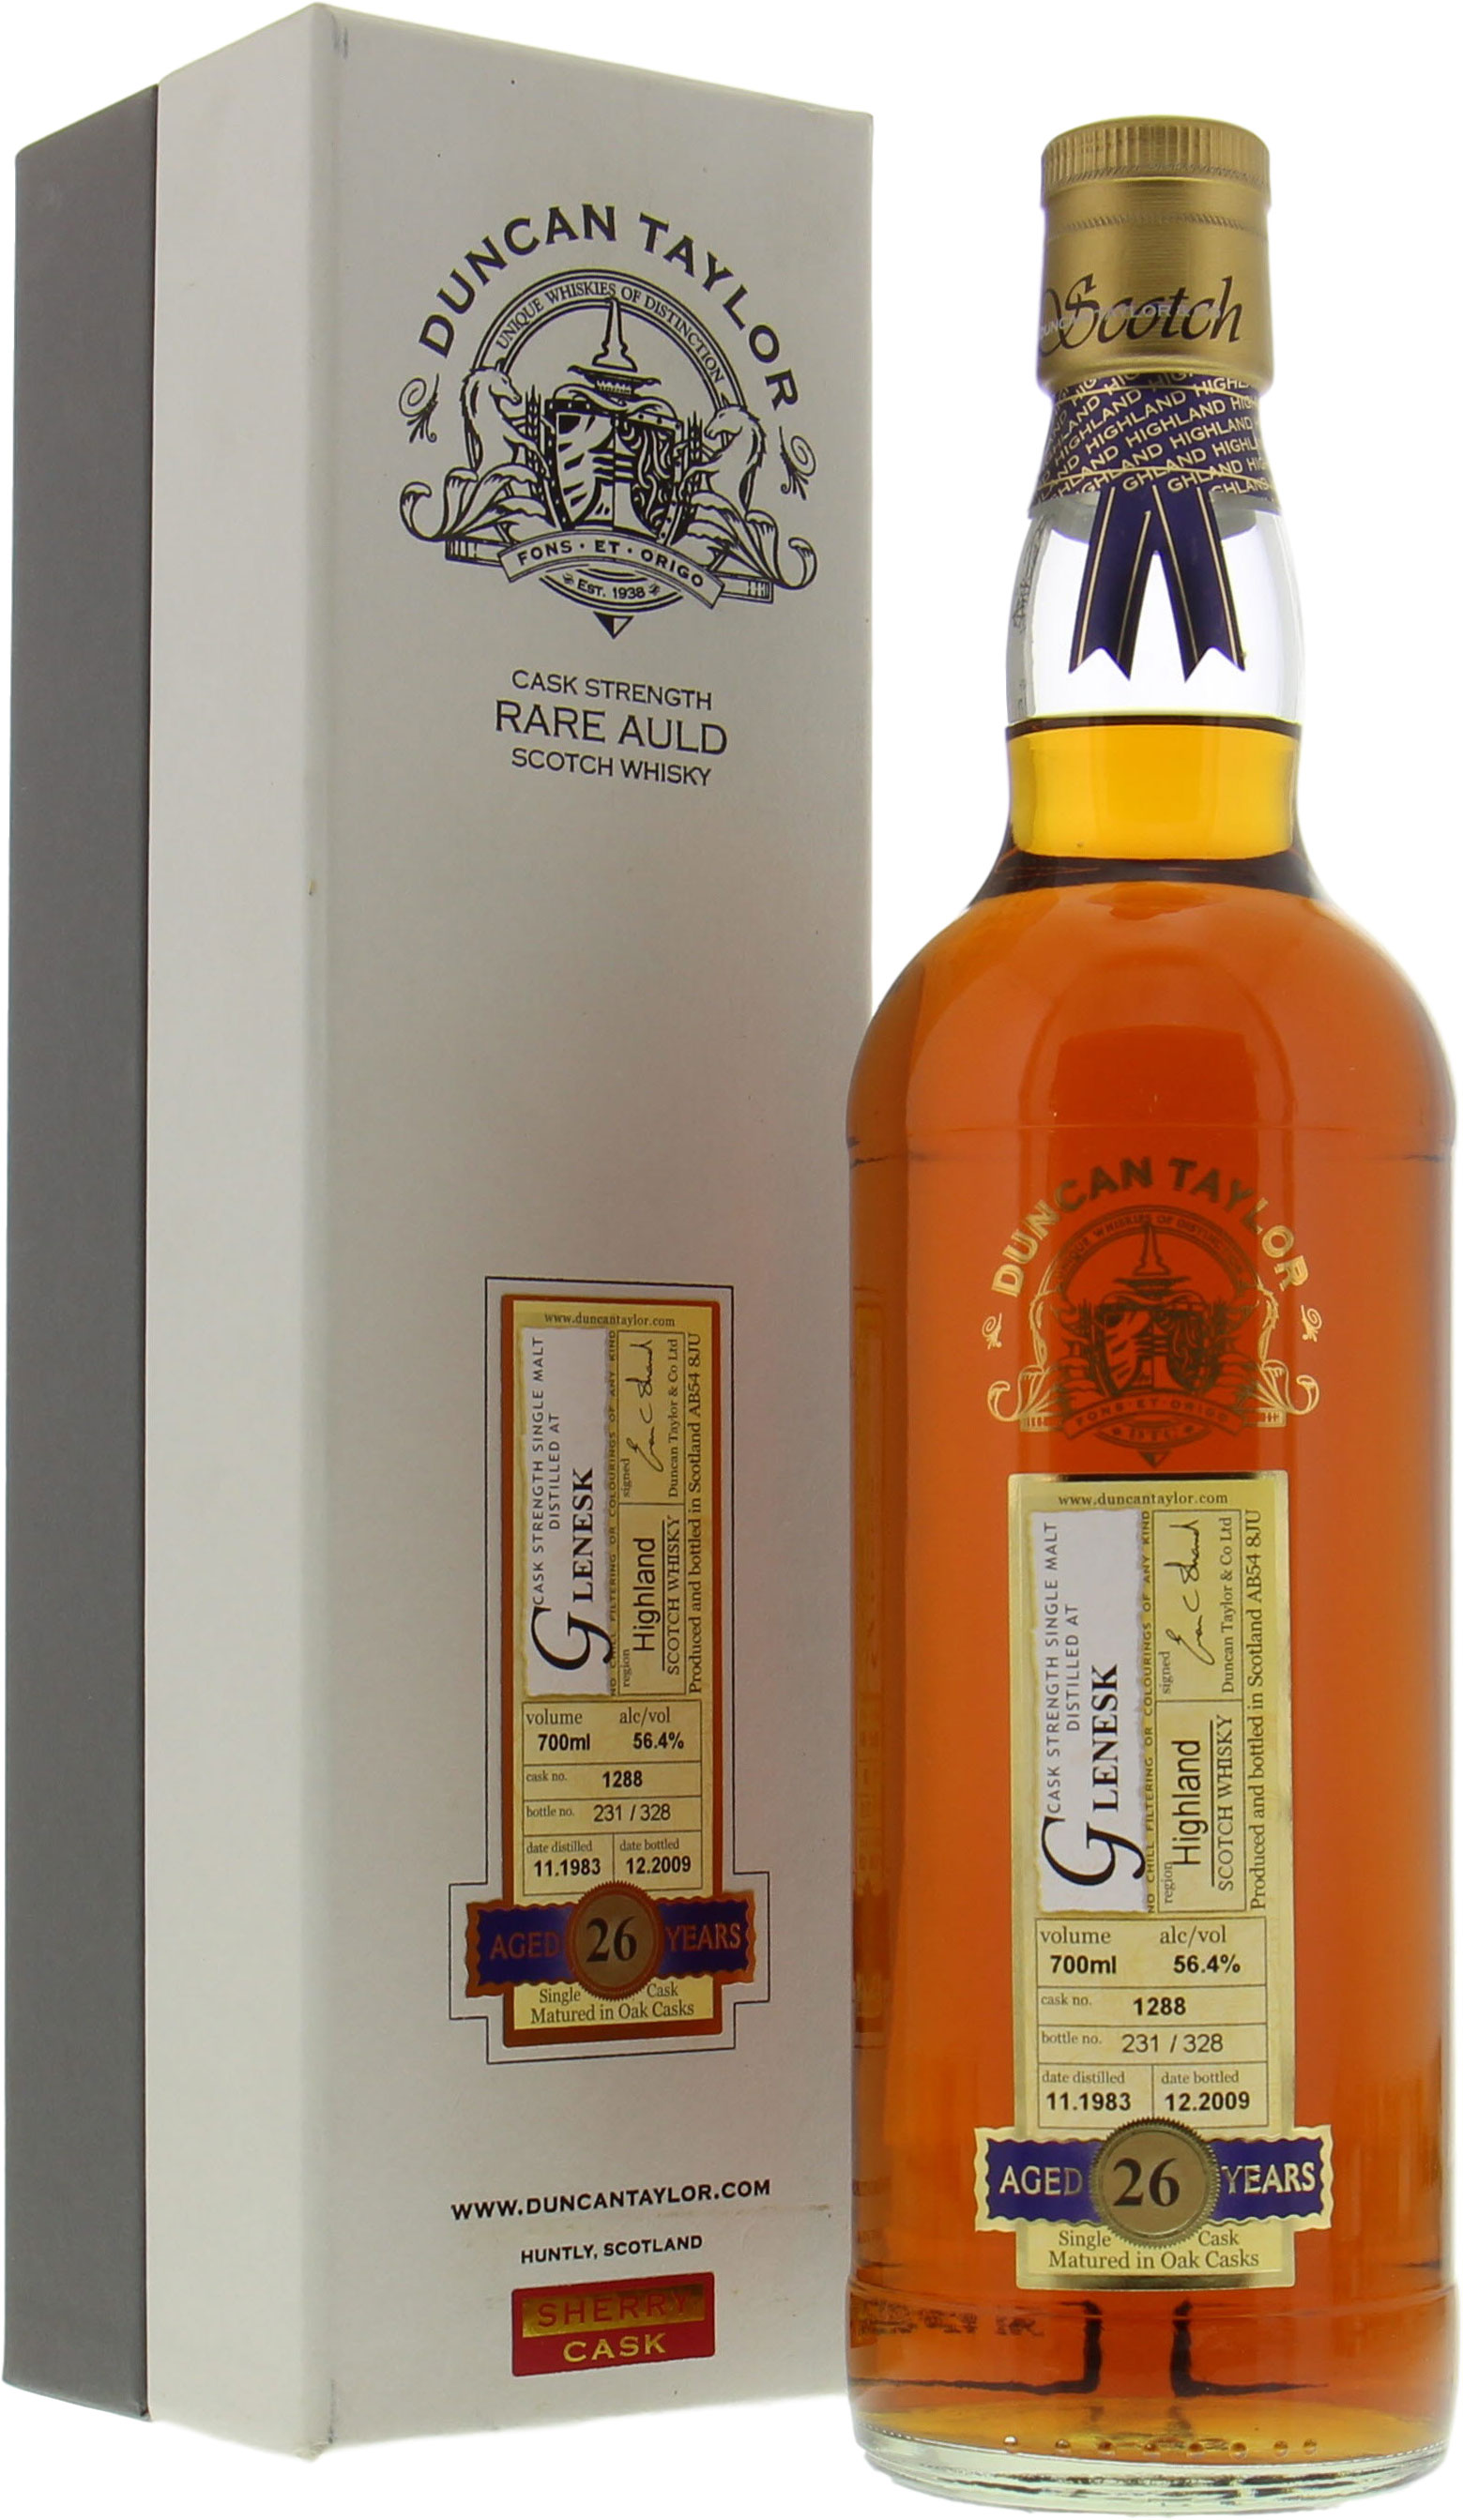 Glenesk - 28 Years Old Rare Auld Duncan Taylor Cask 1288 56.4% 1983 In Original Container